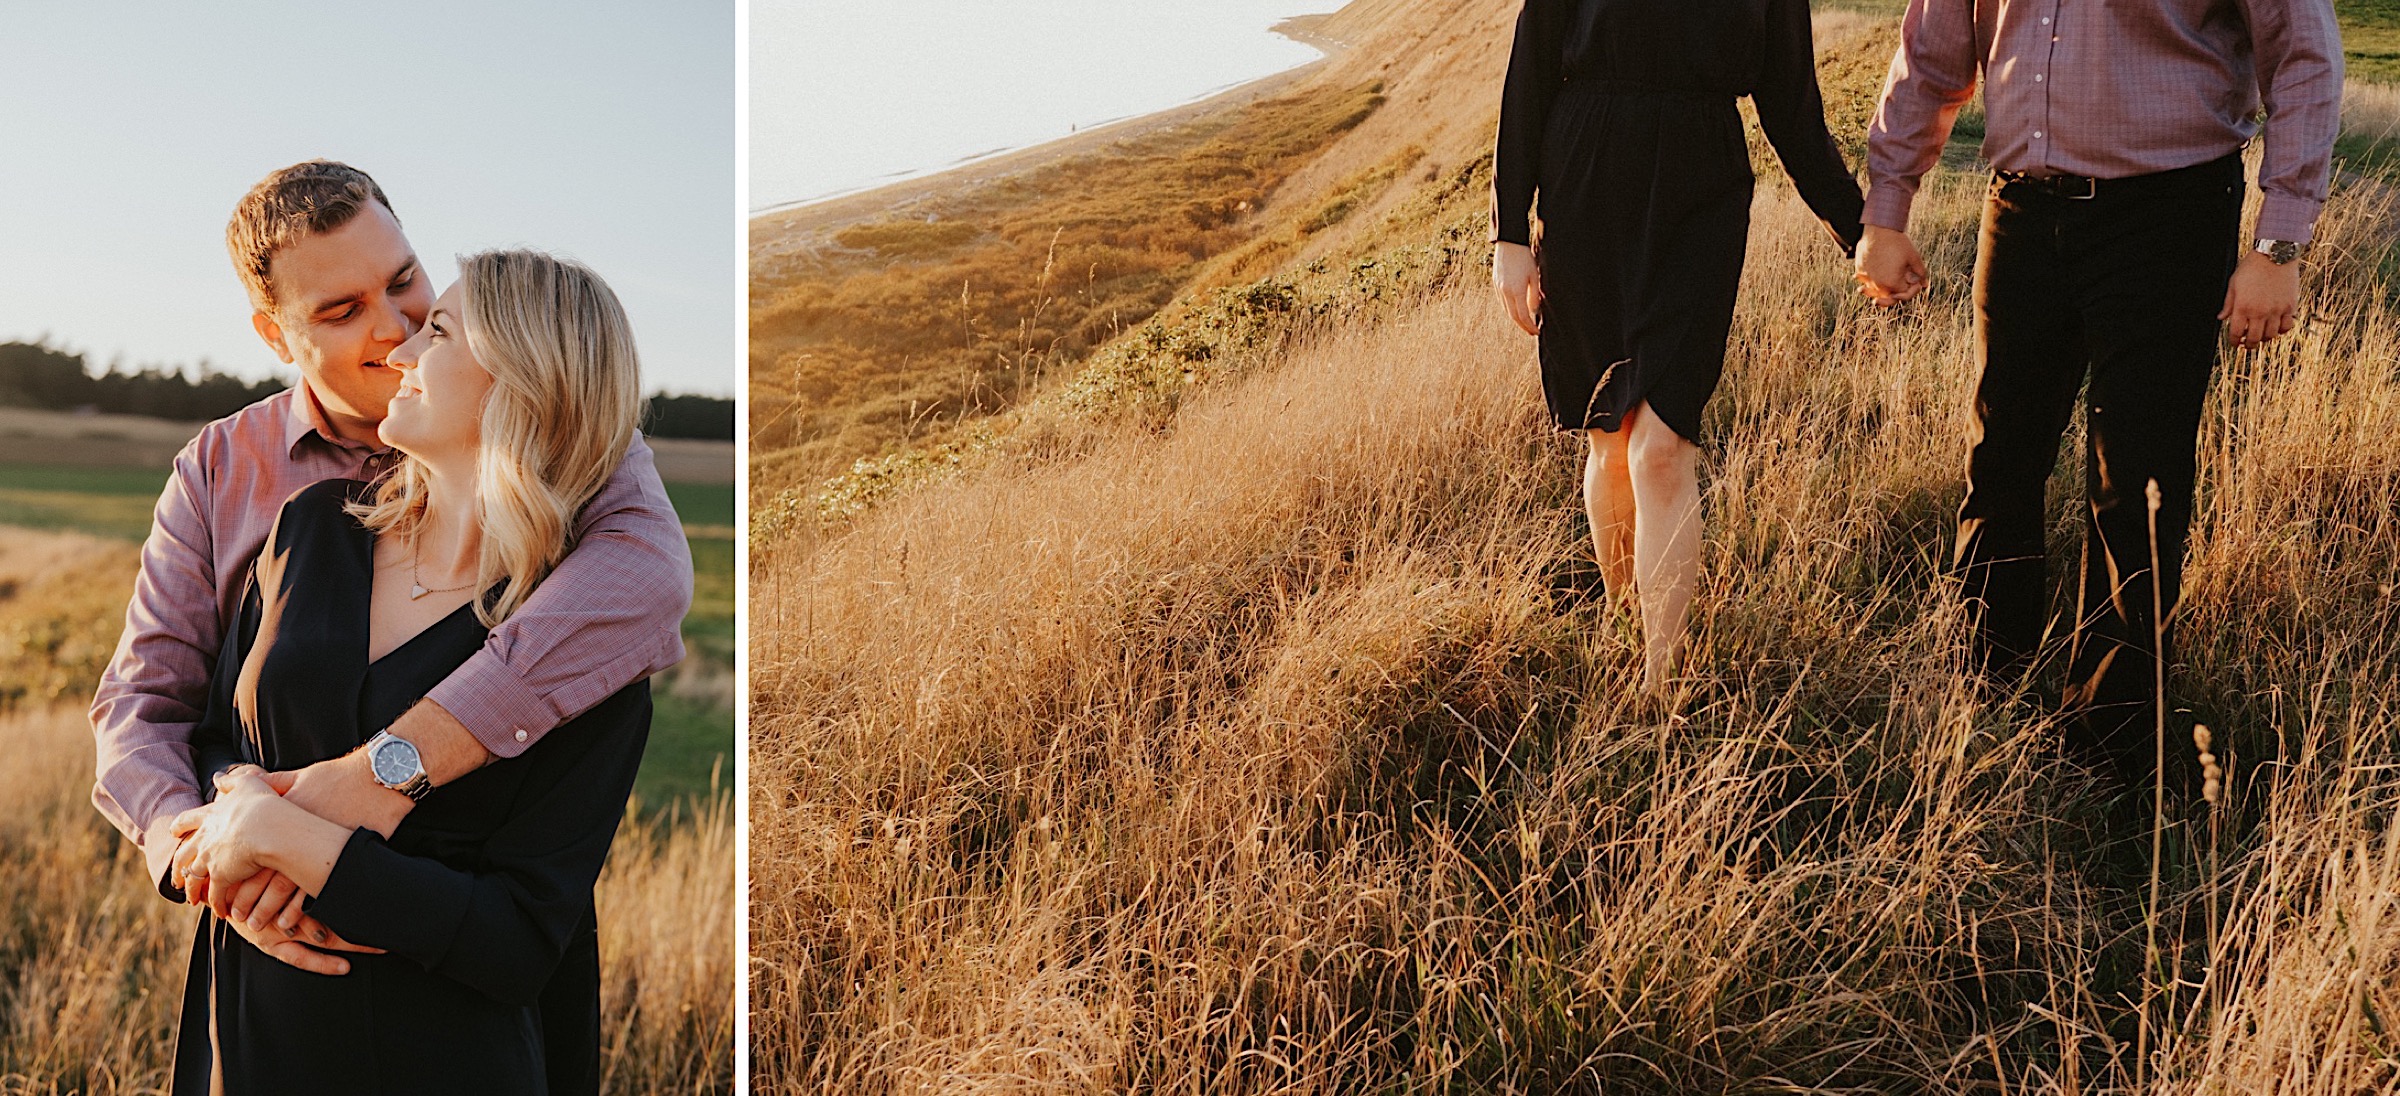 Engagement Session at Ebeys Landing Whidbey Island by Sarah Anne Photography